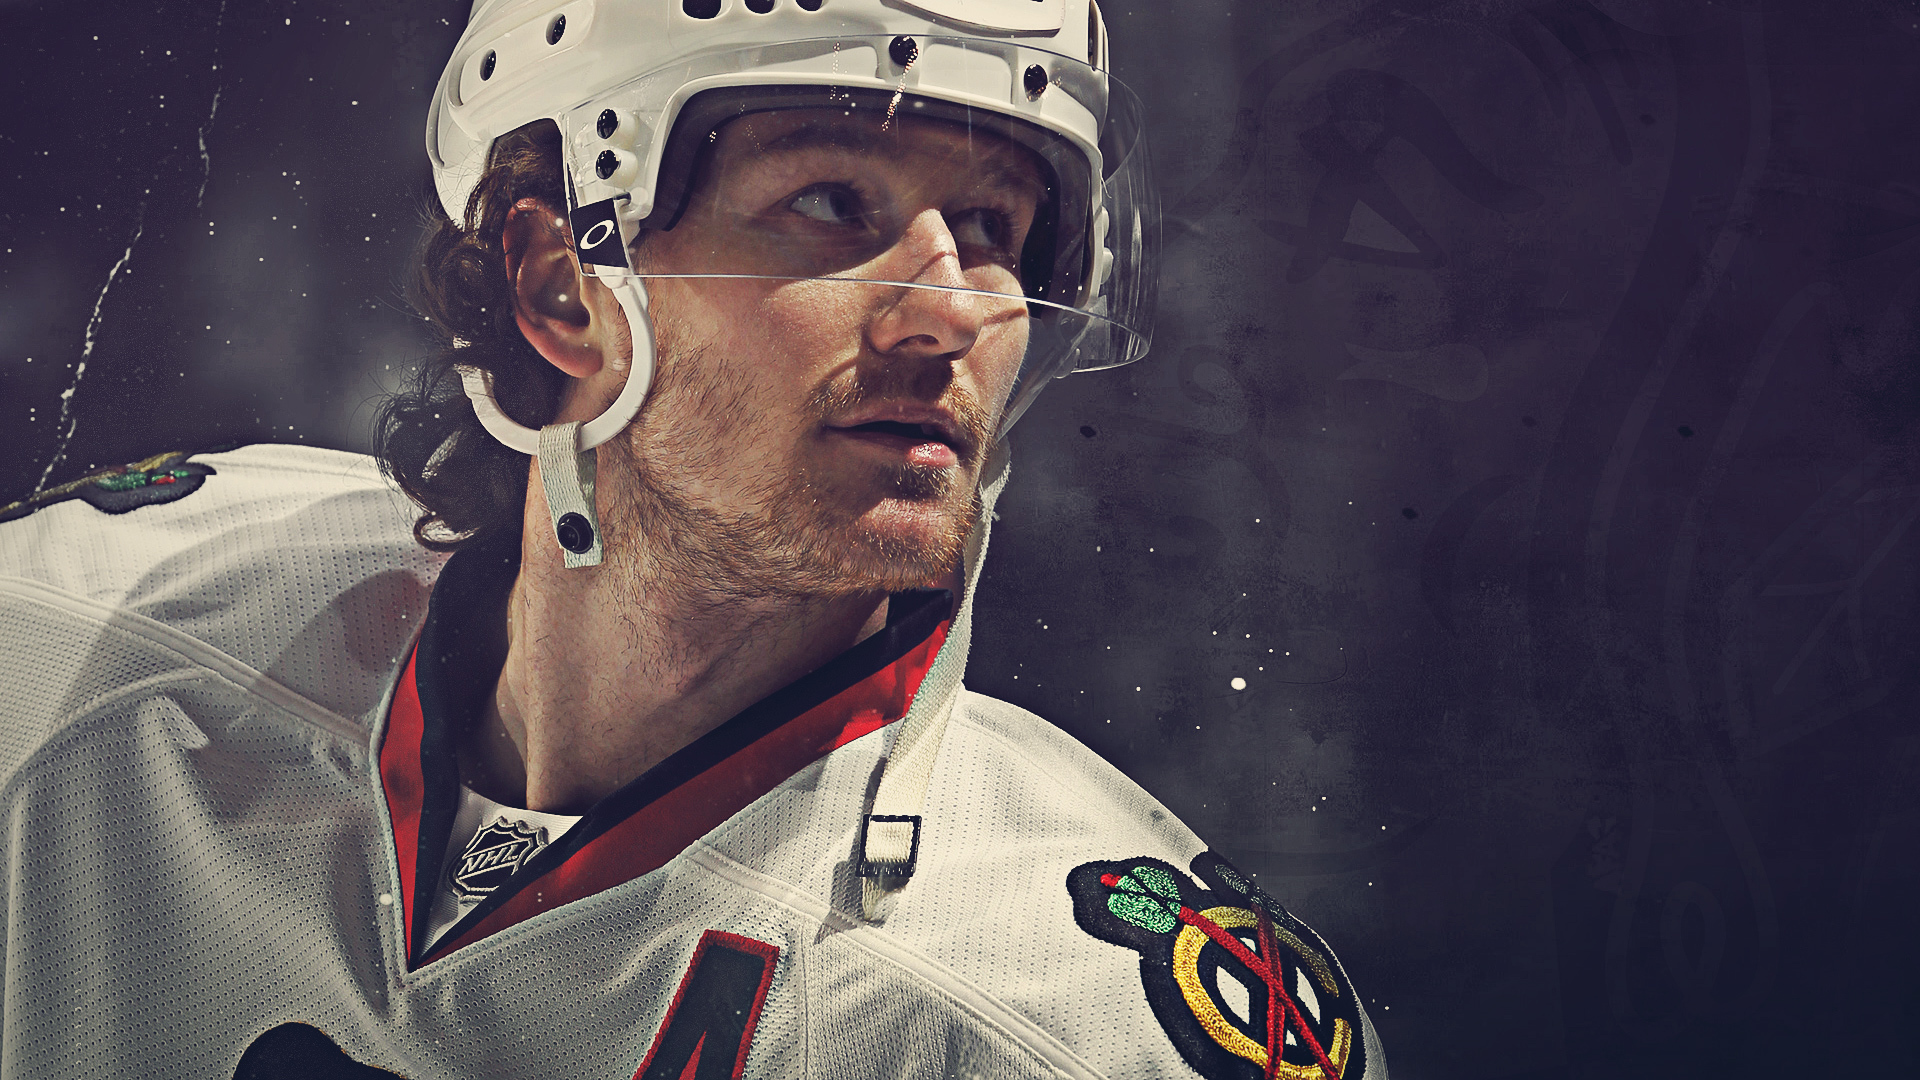 Duncan Keith on ice wallpaper and image, picture, photo